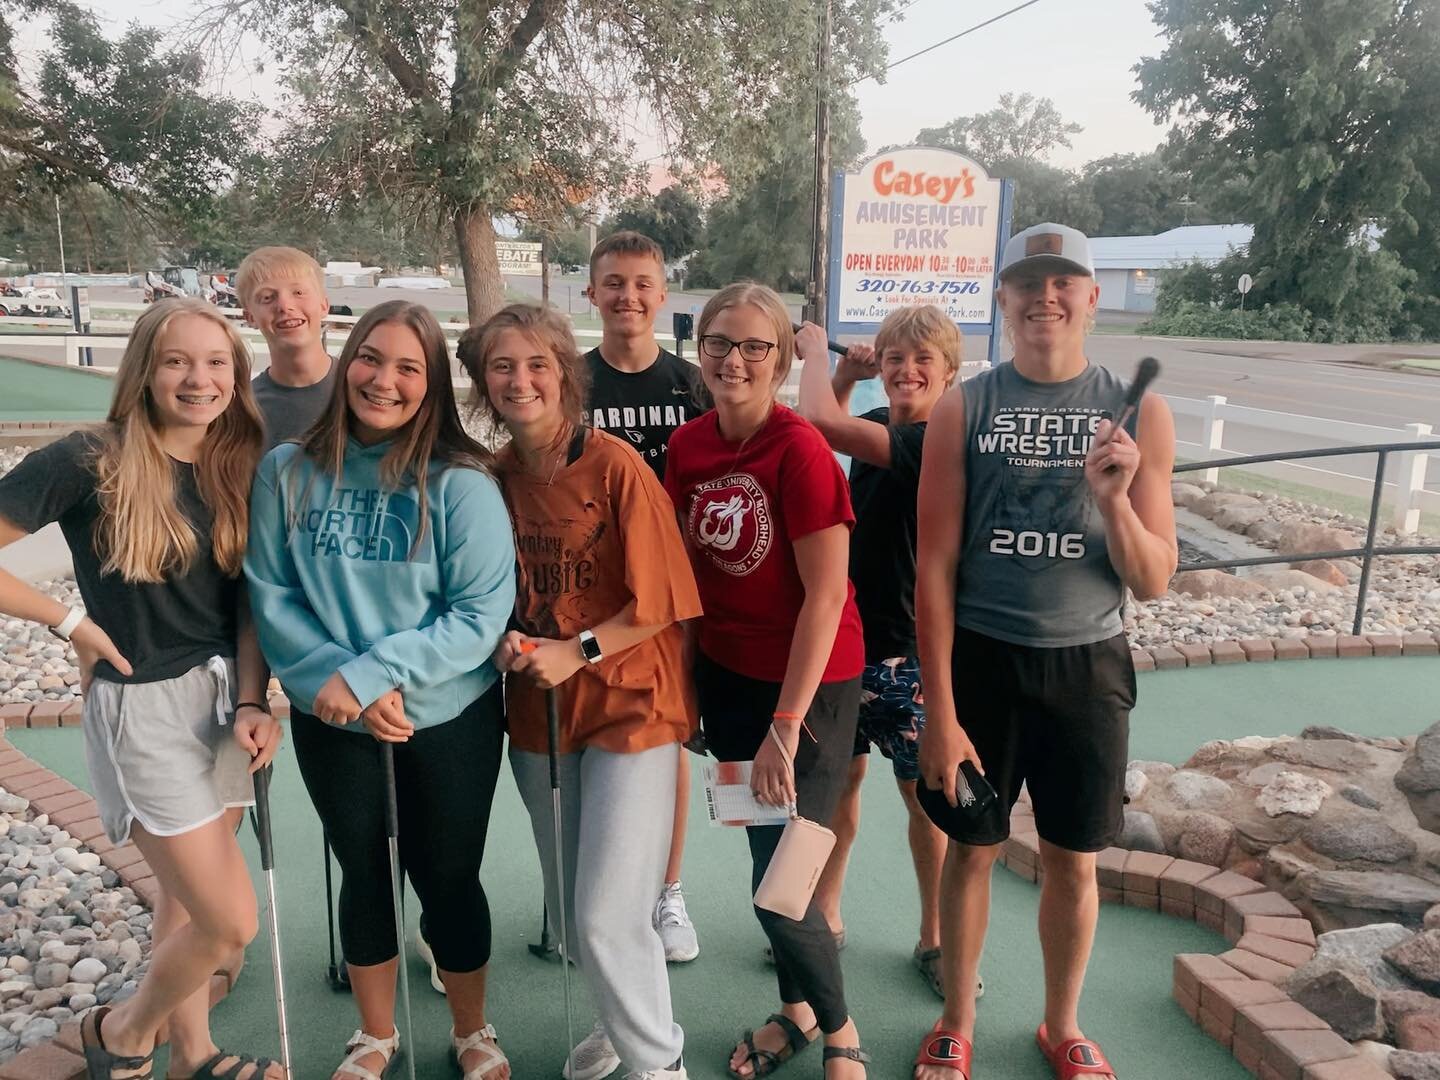 10/10 would recommend a mini golf night! ⛳️